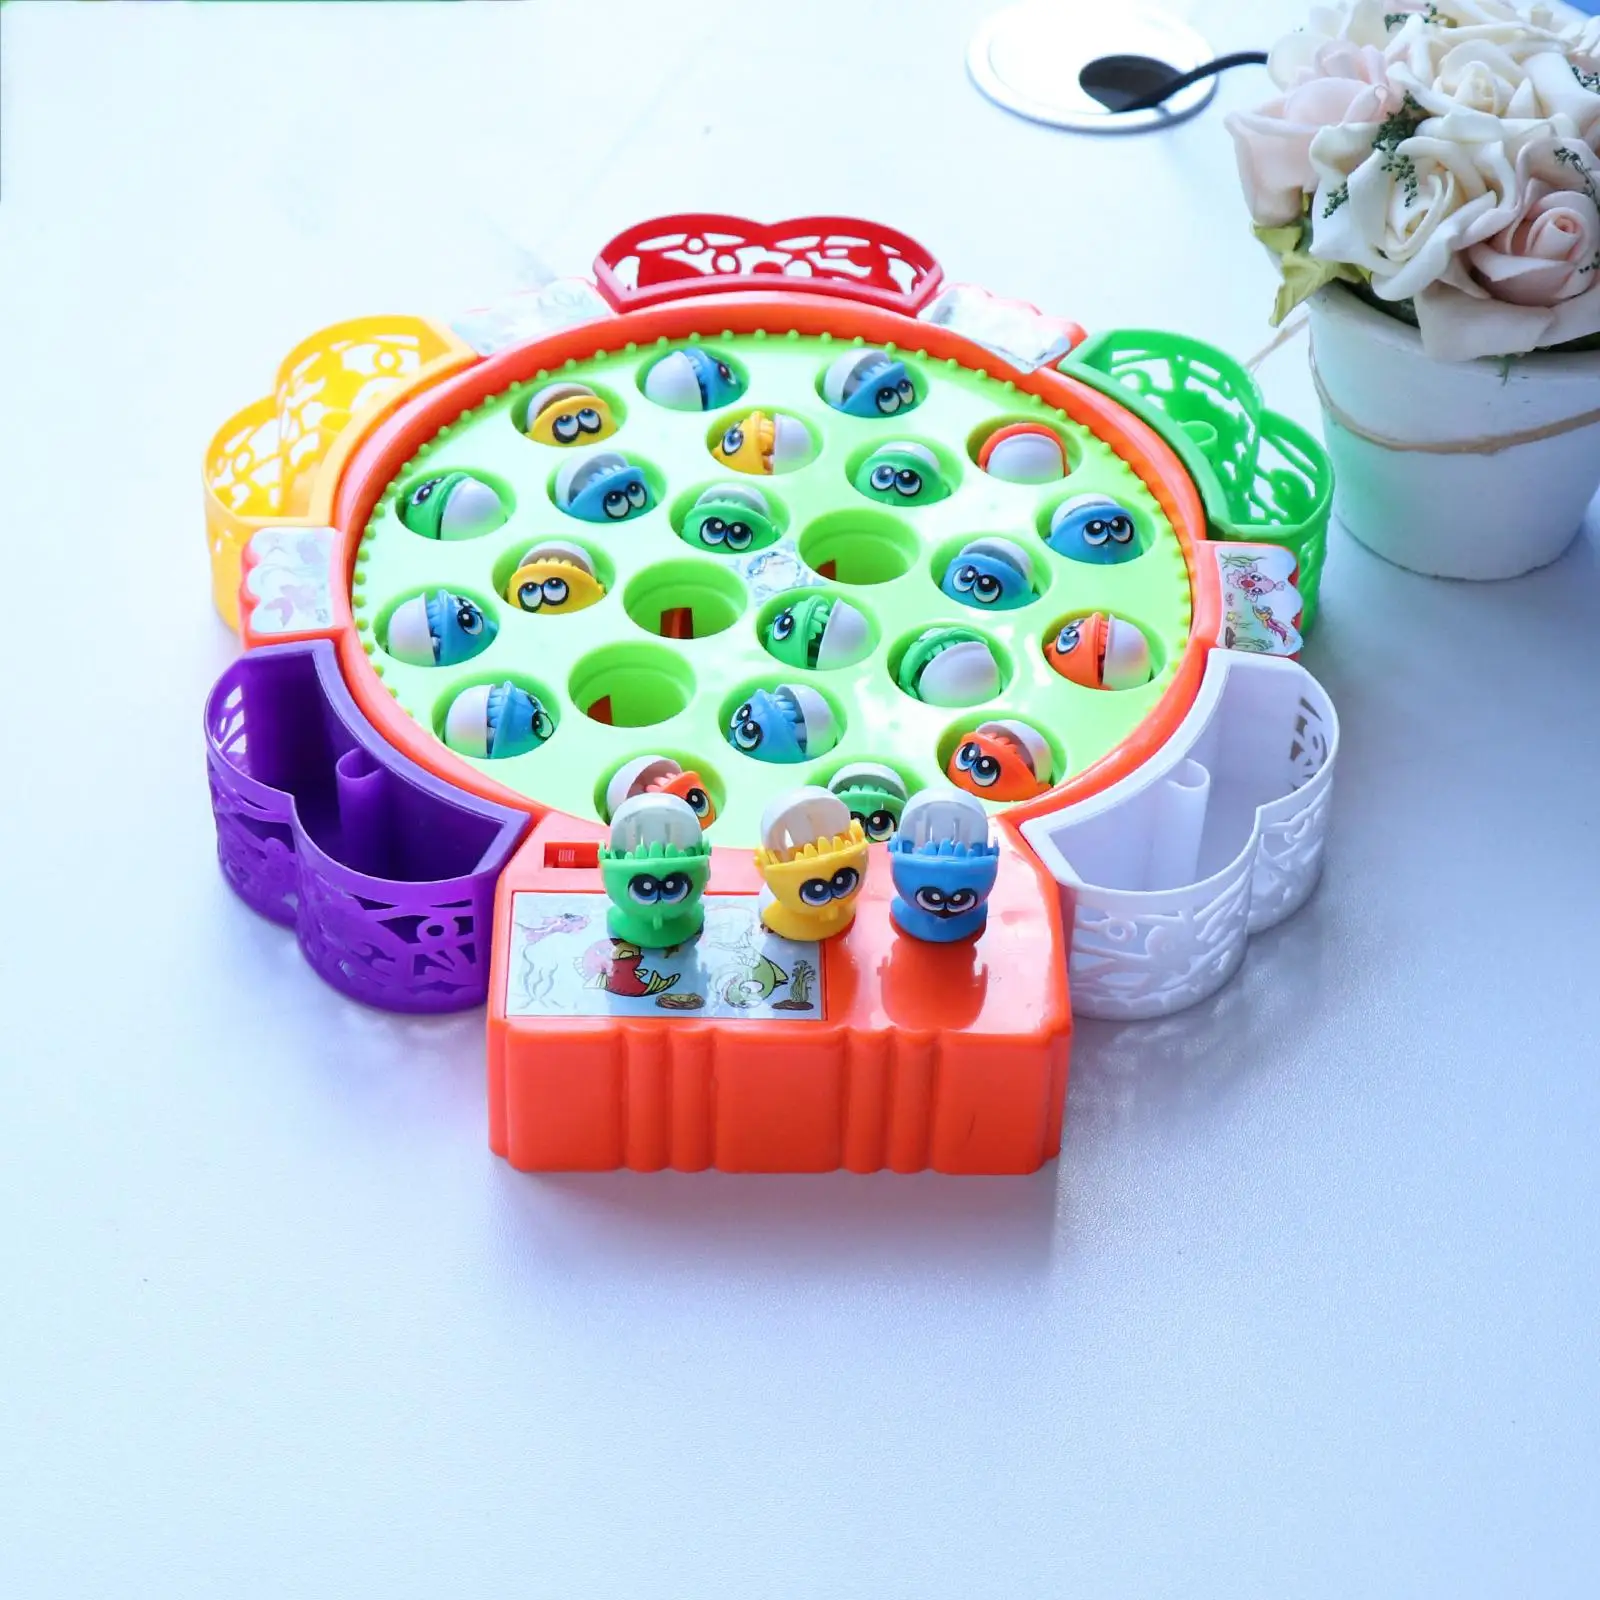 Fishing Game, Electric Double Rotating Fish Pool with Lights and Music, Fishing Board 4 Fish, Children Education Toy